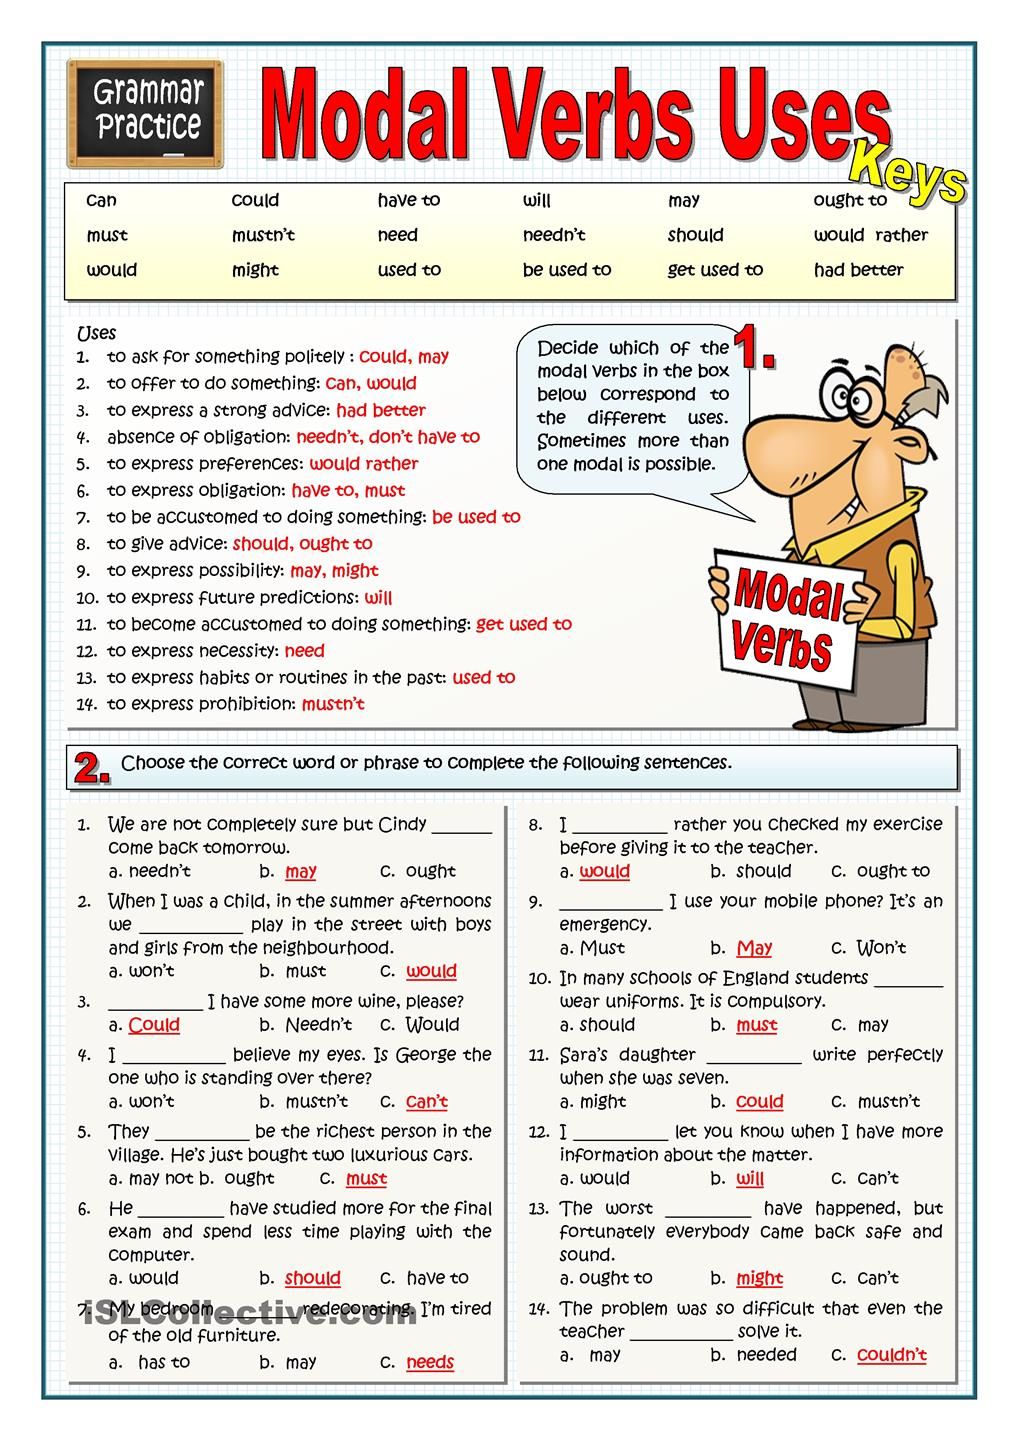 Modal Verbs Exercises With Answers